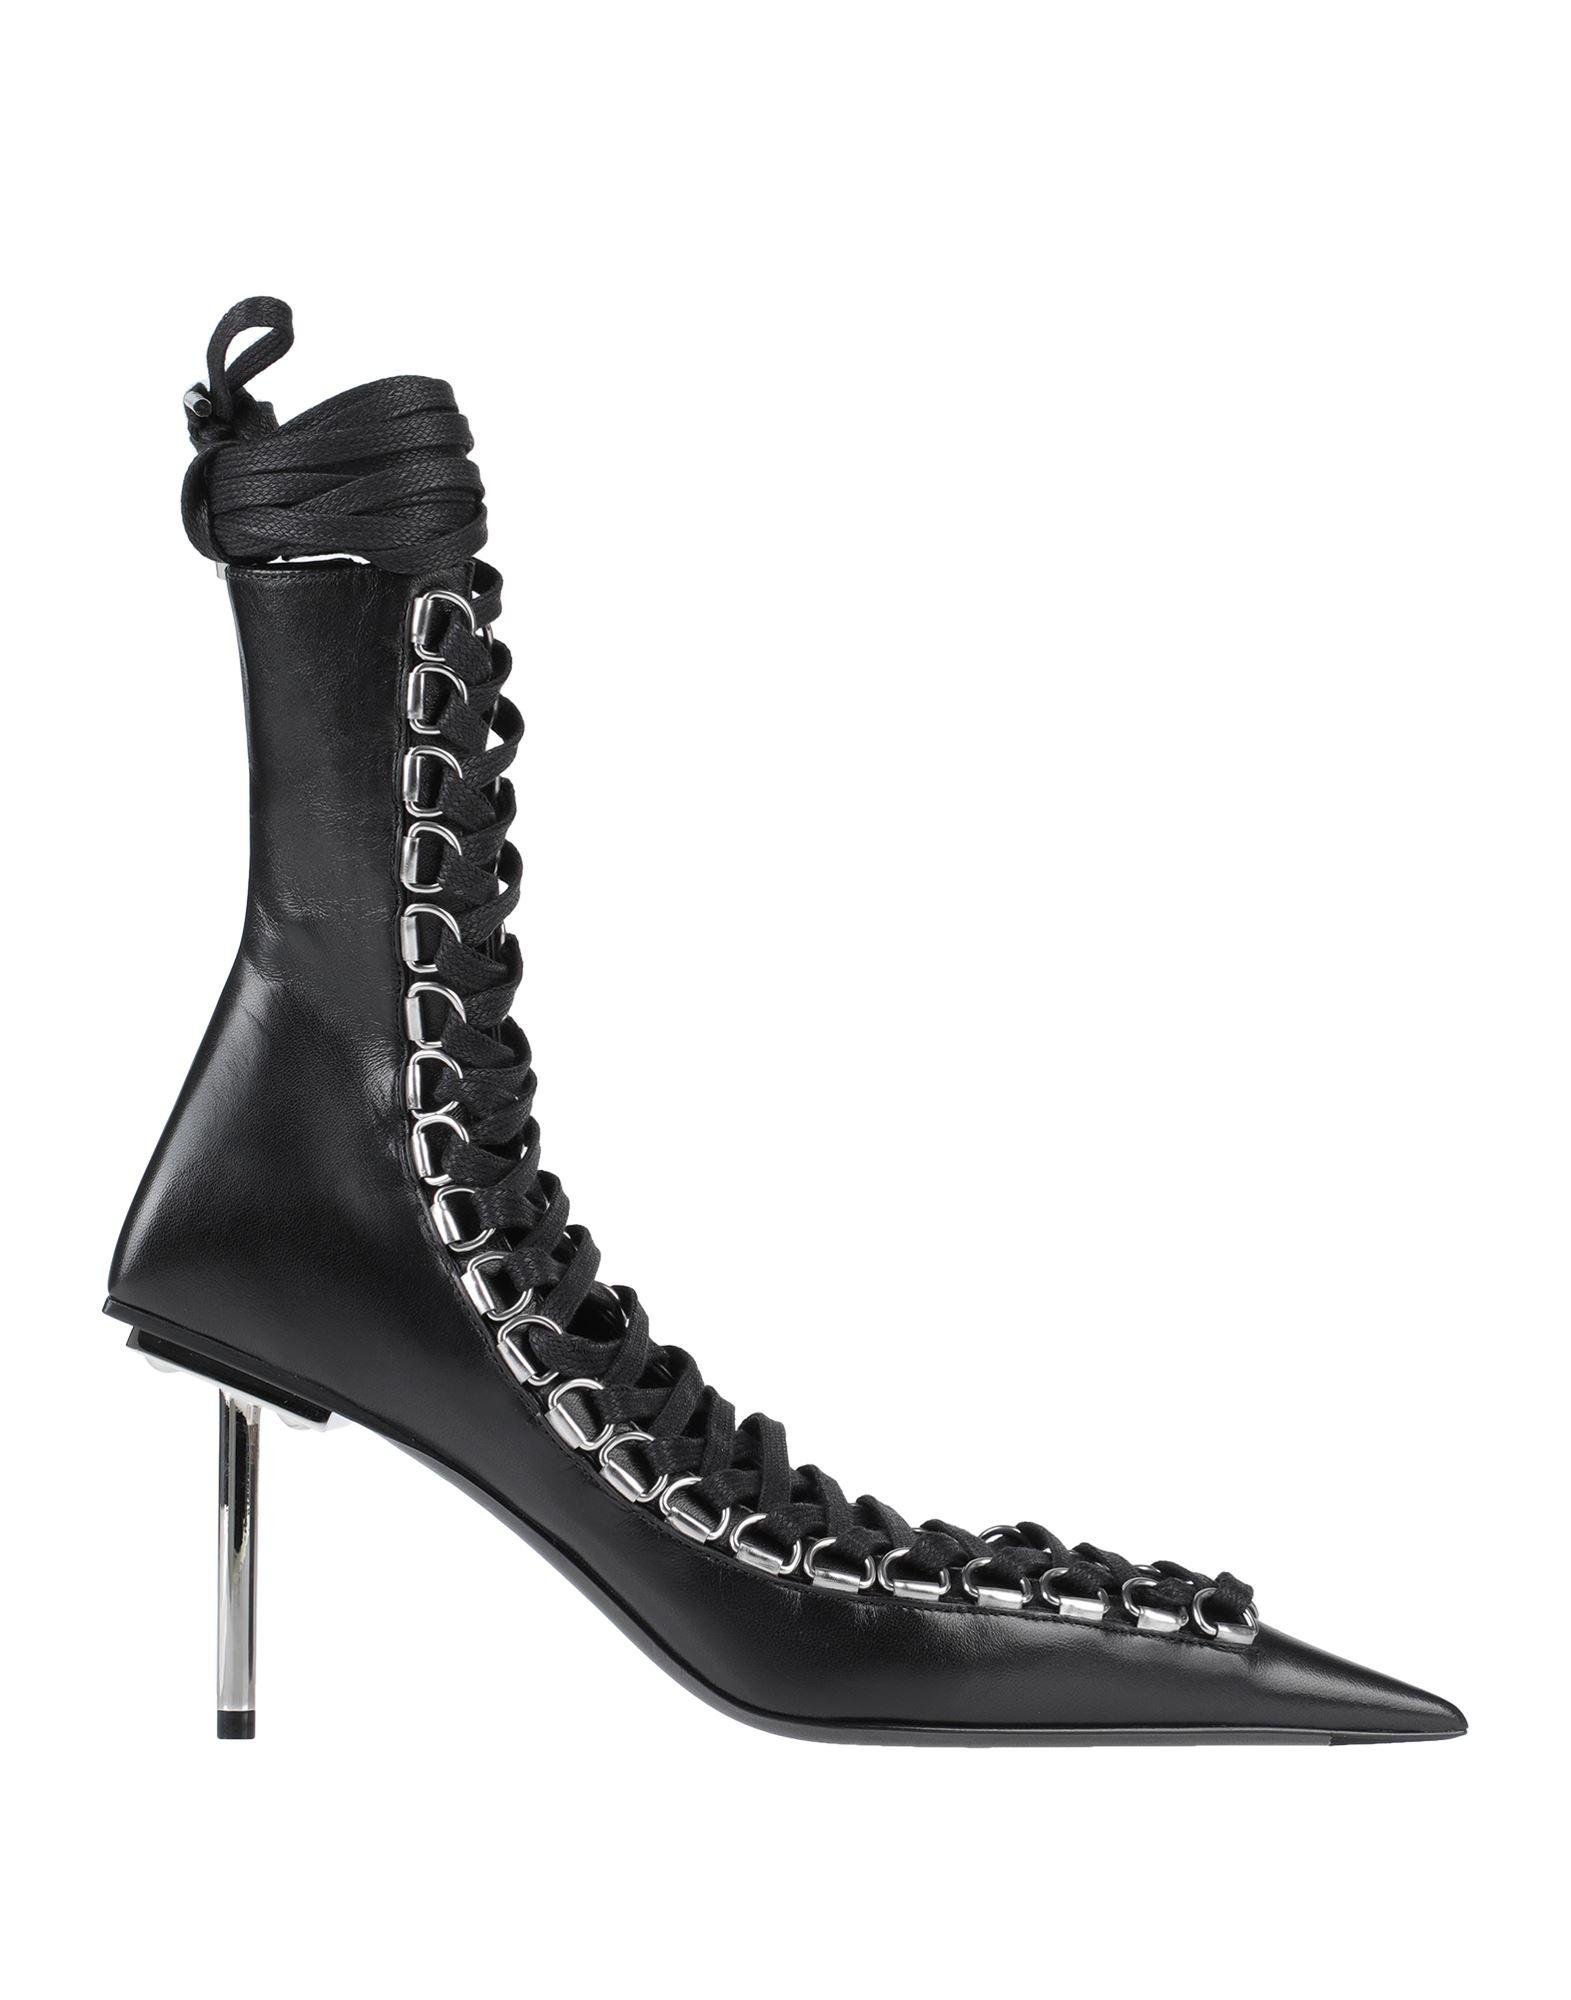 Balenciaga Ankle Boots in Black | Lyst